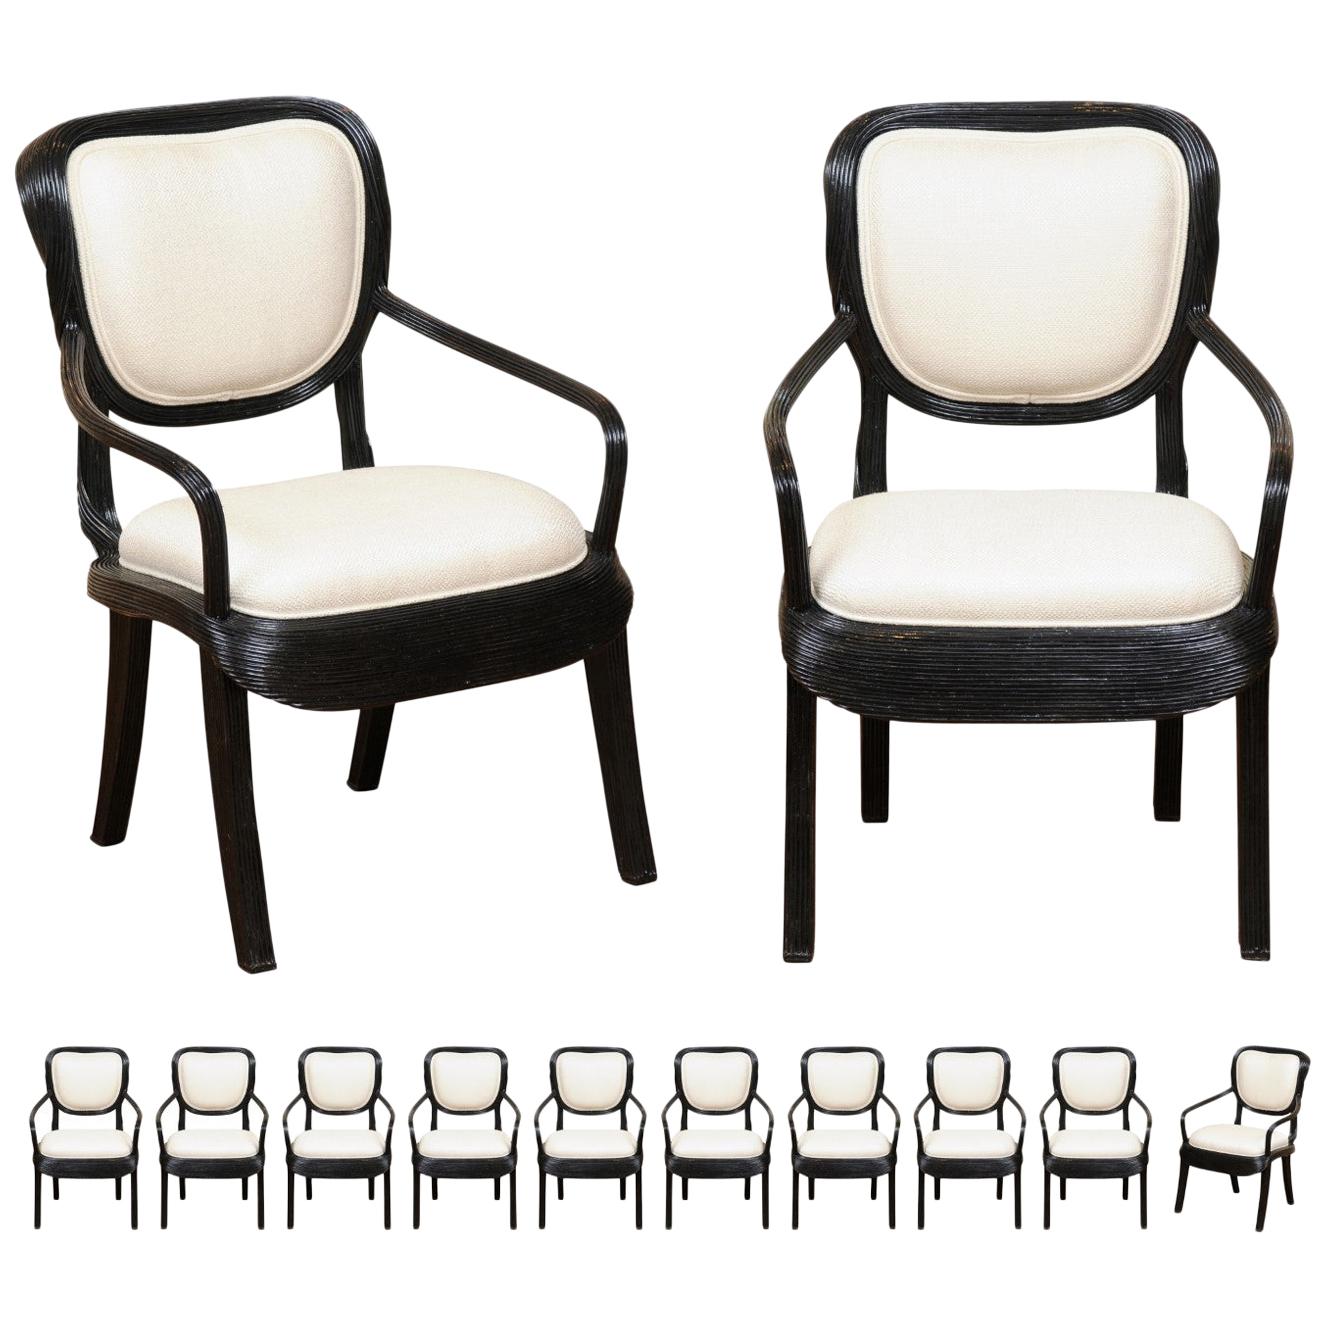 Extraordinary Set of 12 Trompe L'oiel Dining Chairs by Cobonpue, circa 1980 For Sale